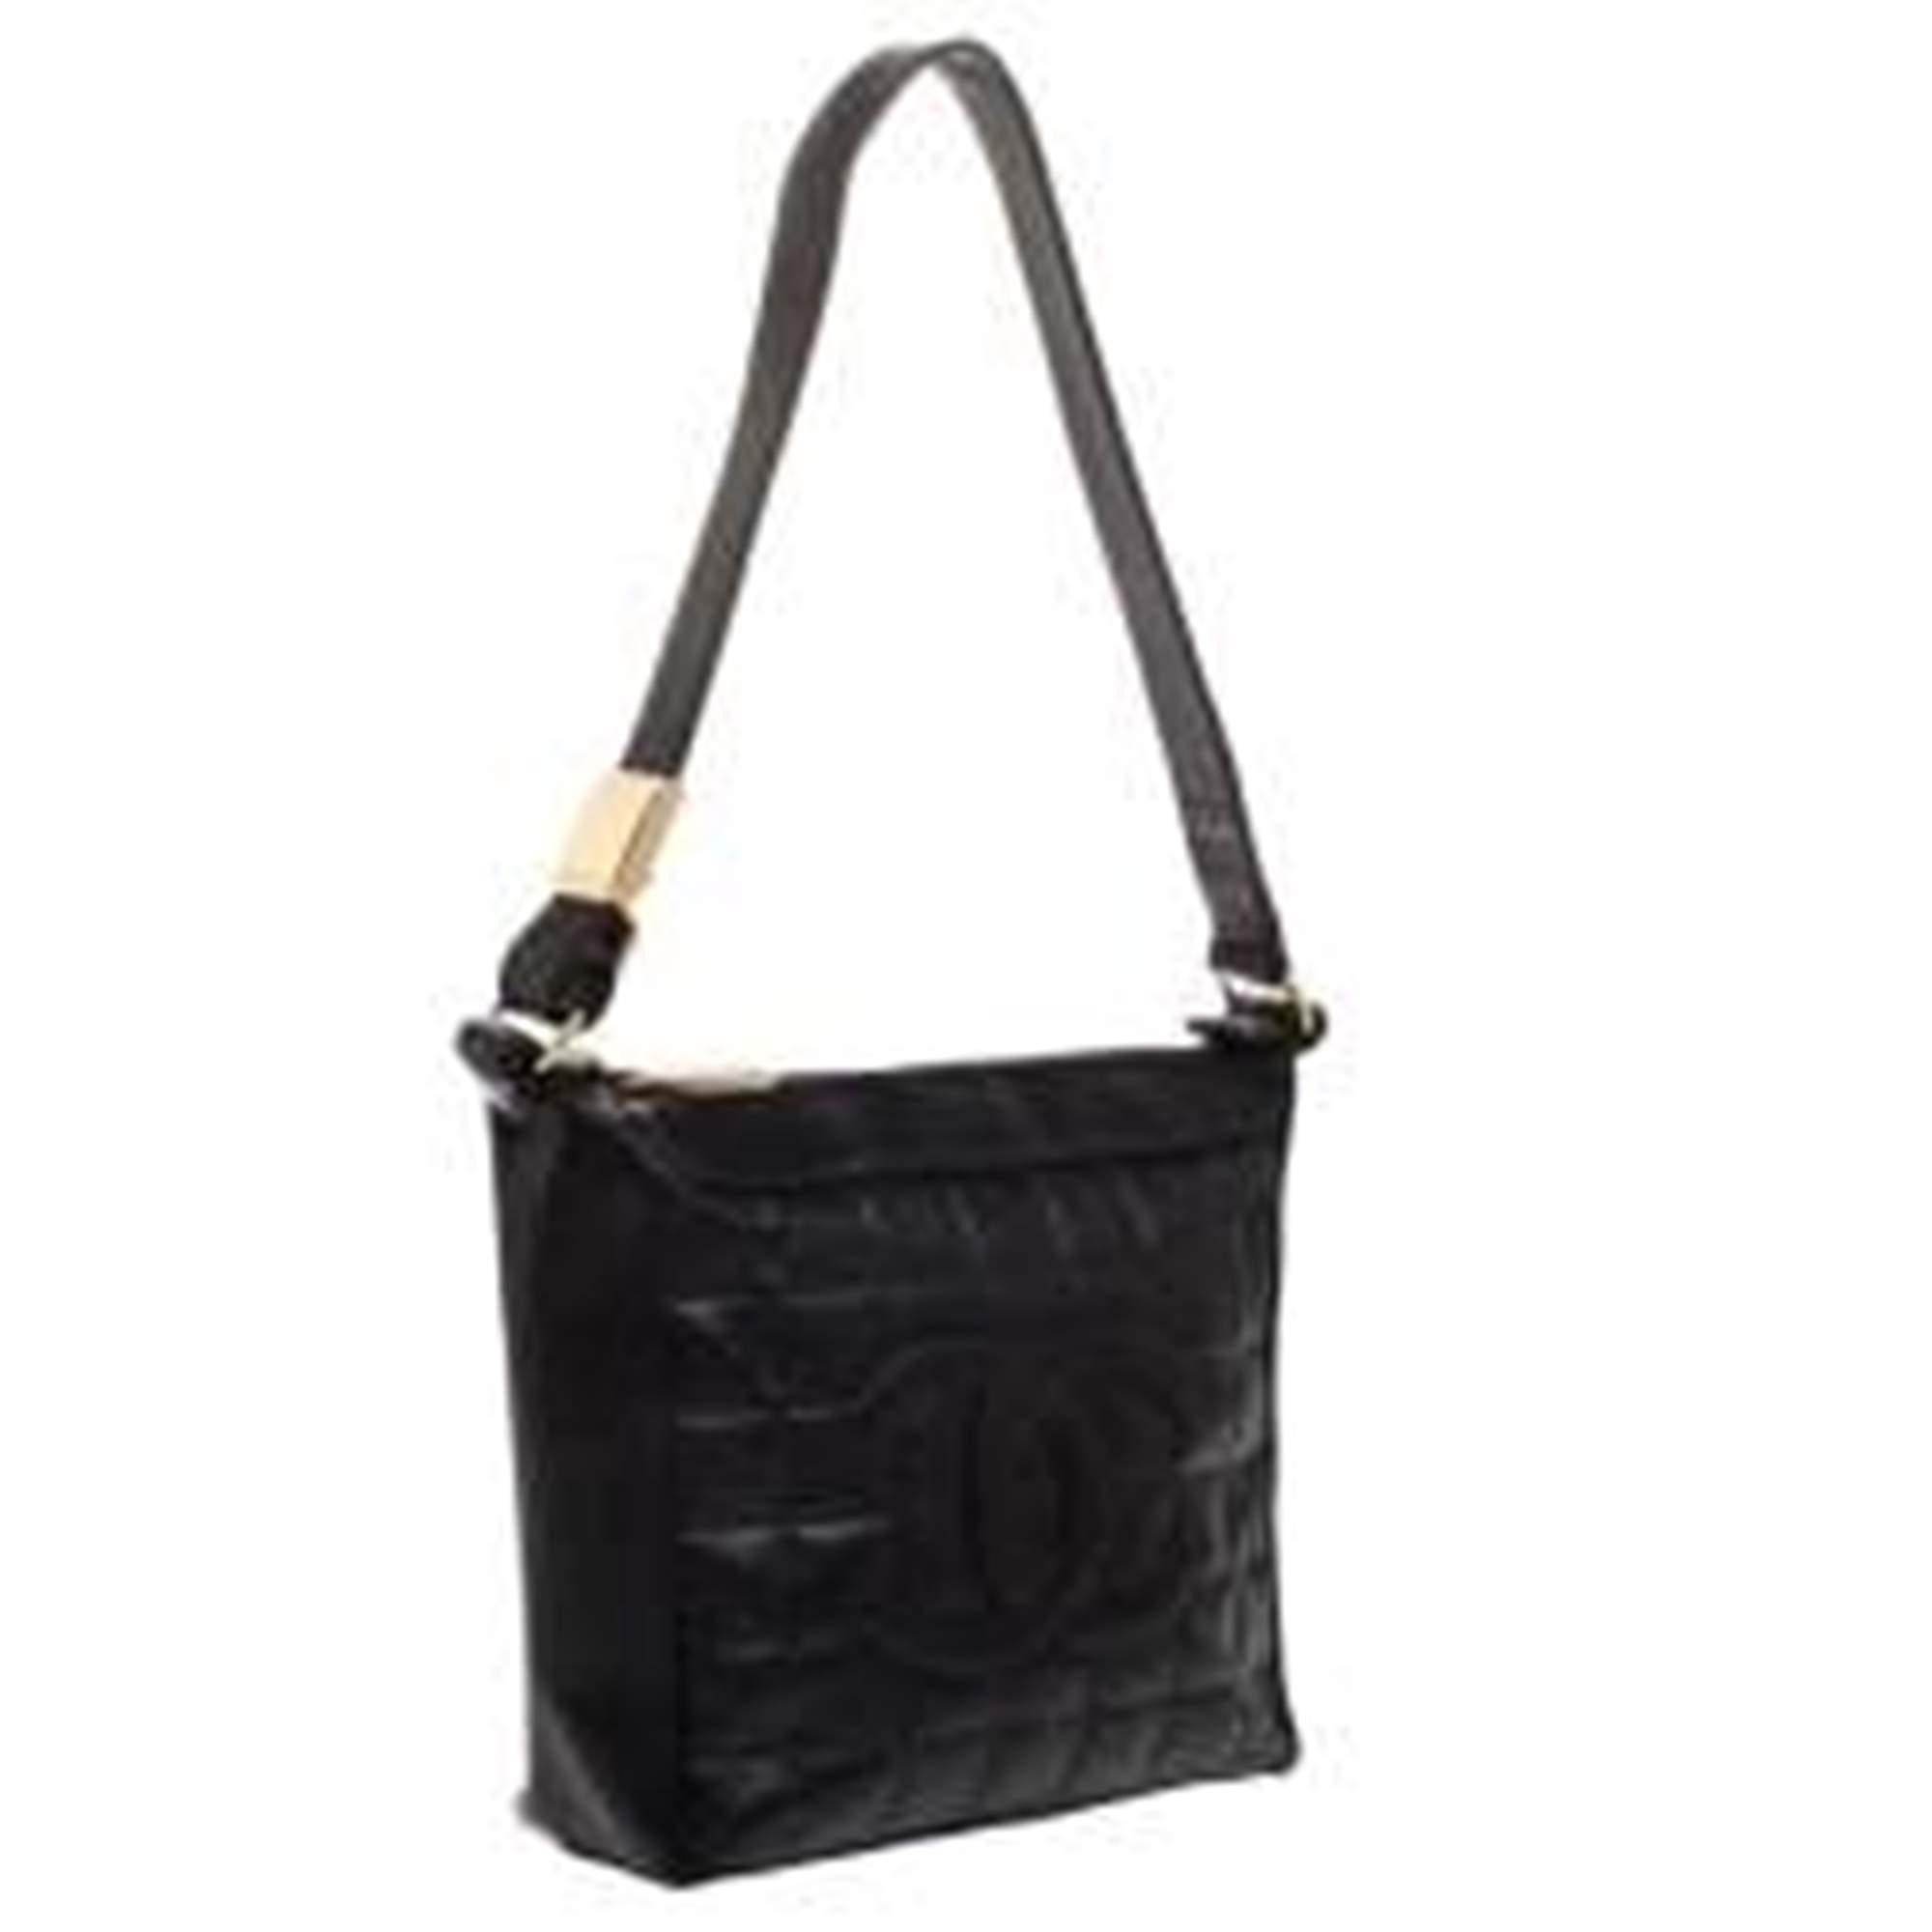 Women's Chanel Black Leather Small Chocolate Bar Shoulder Bag